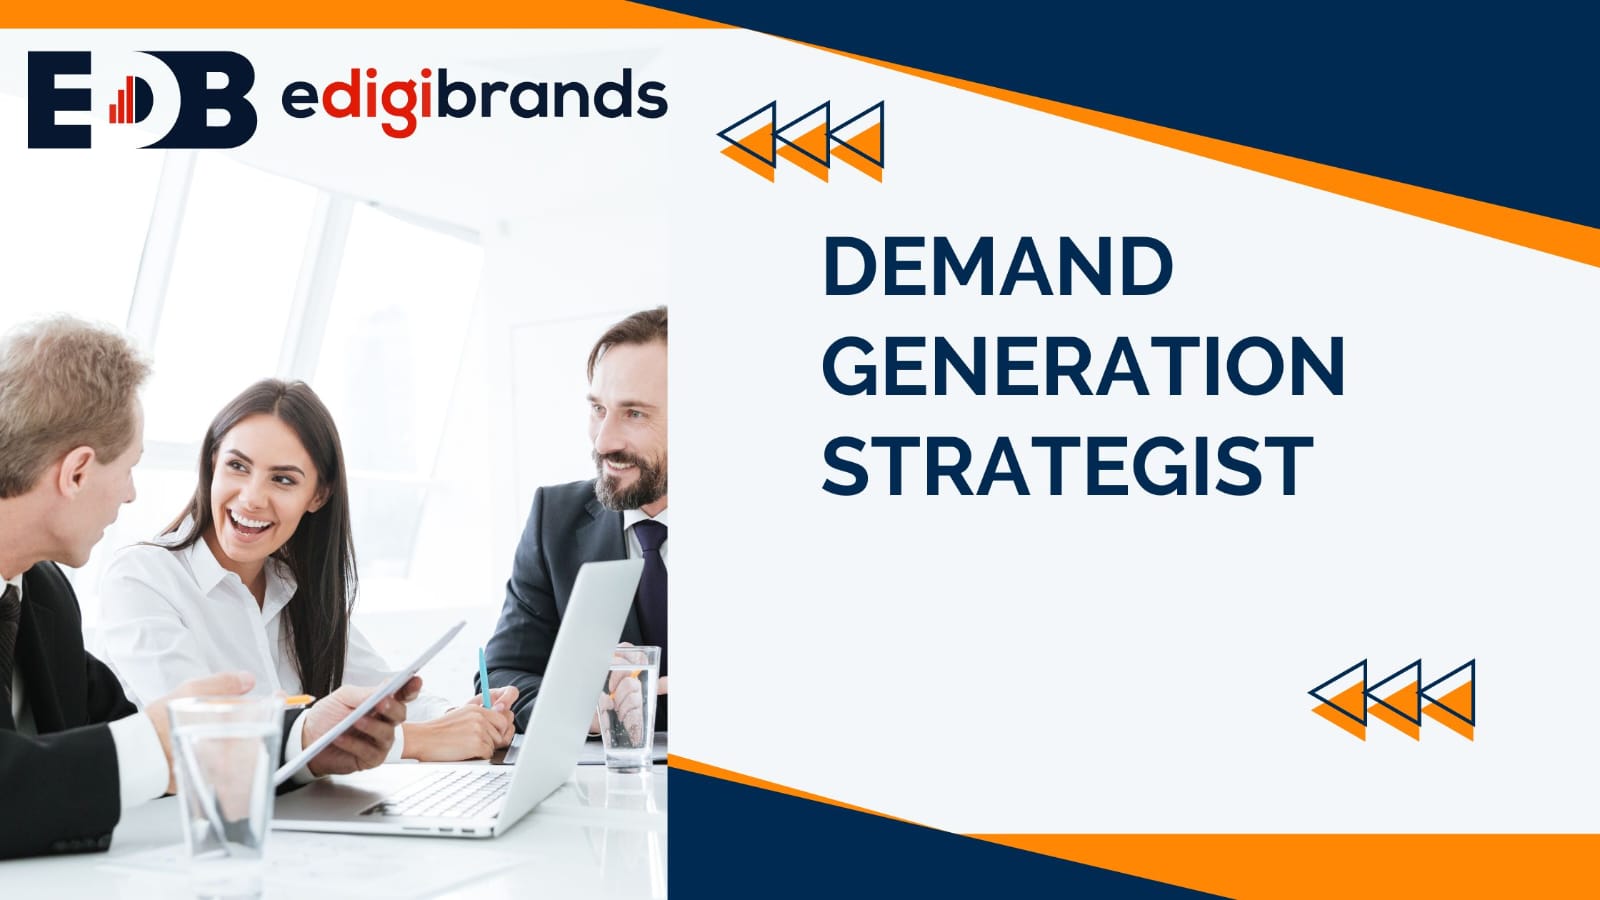 How Demand Generation Strategist can help you in 2023?